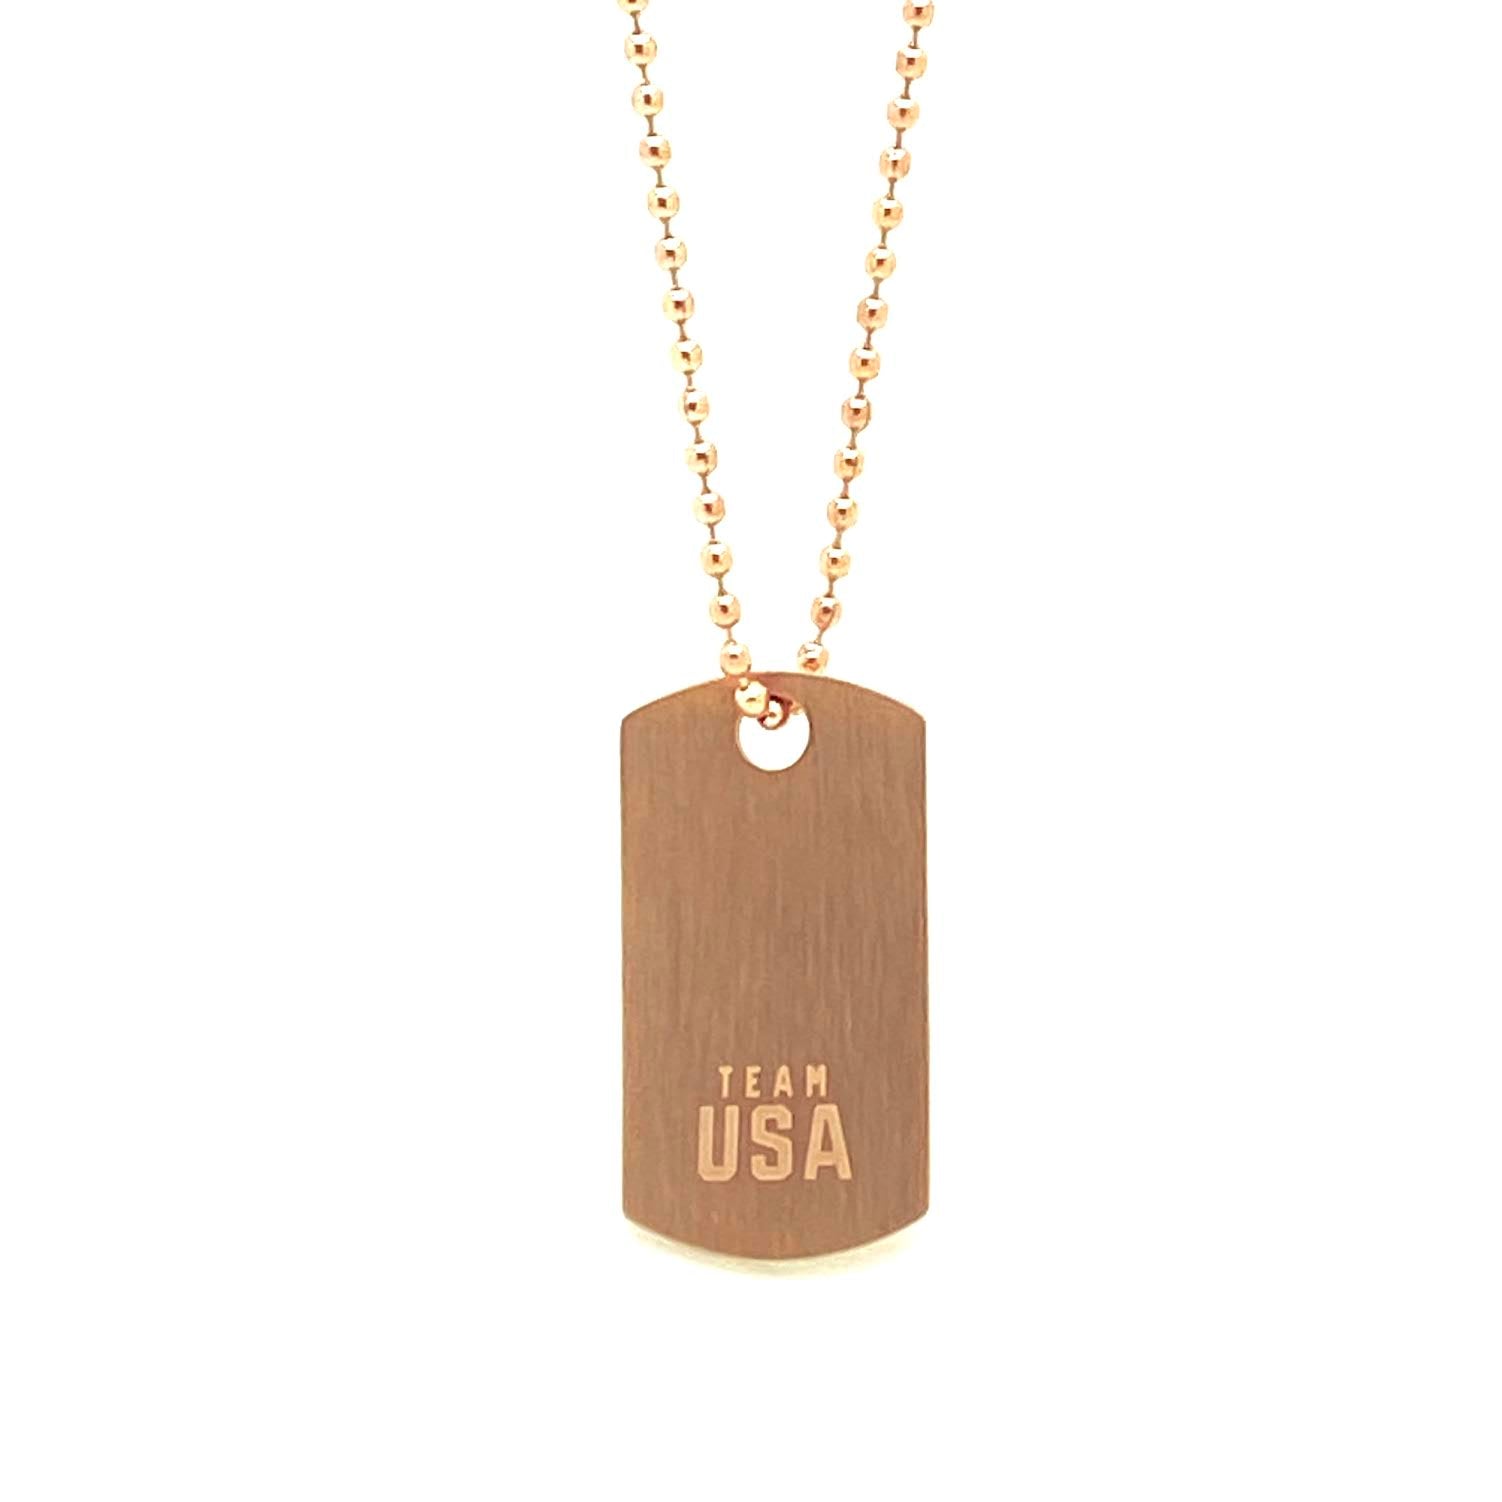 Team USA Dog Tags. Olympics. Los Angeles 2028 Olympics. Made by WristBend